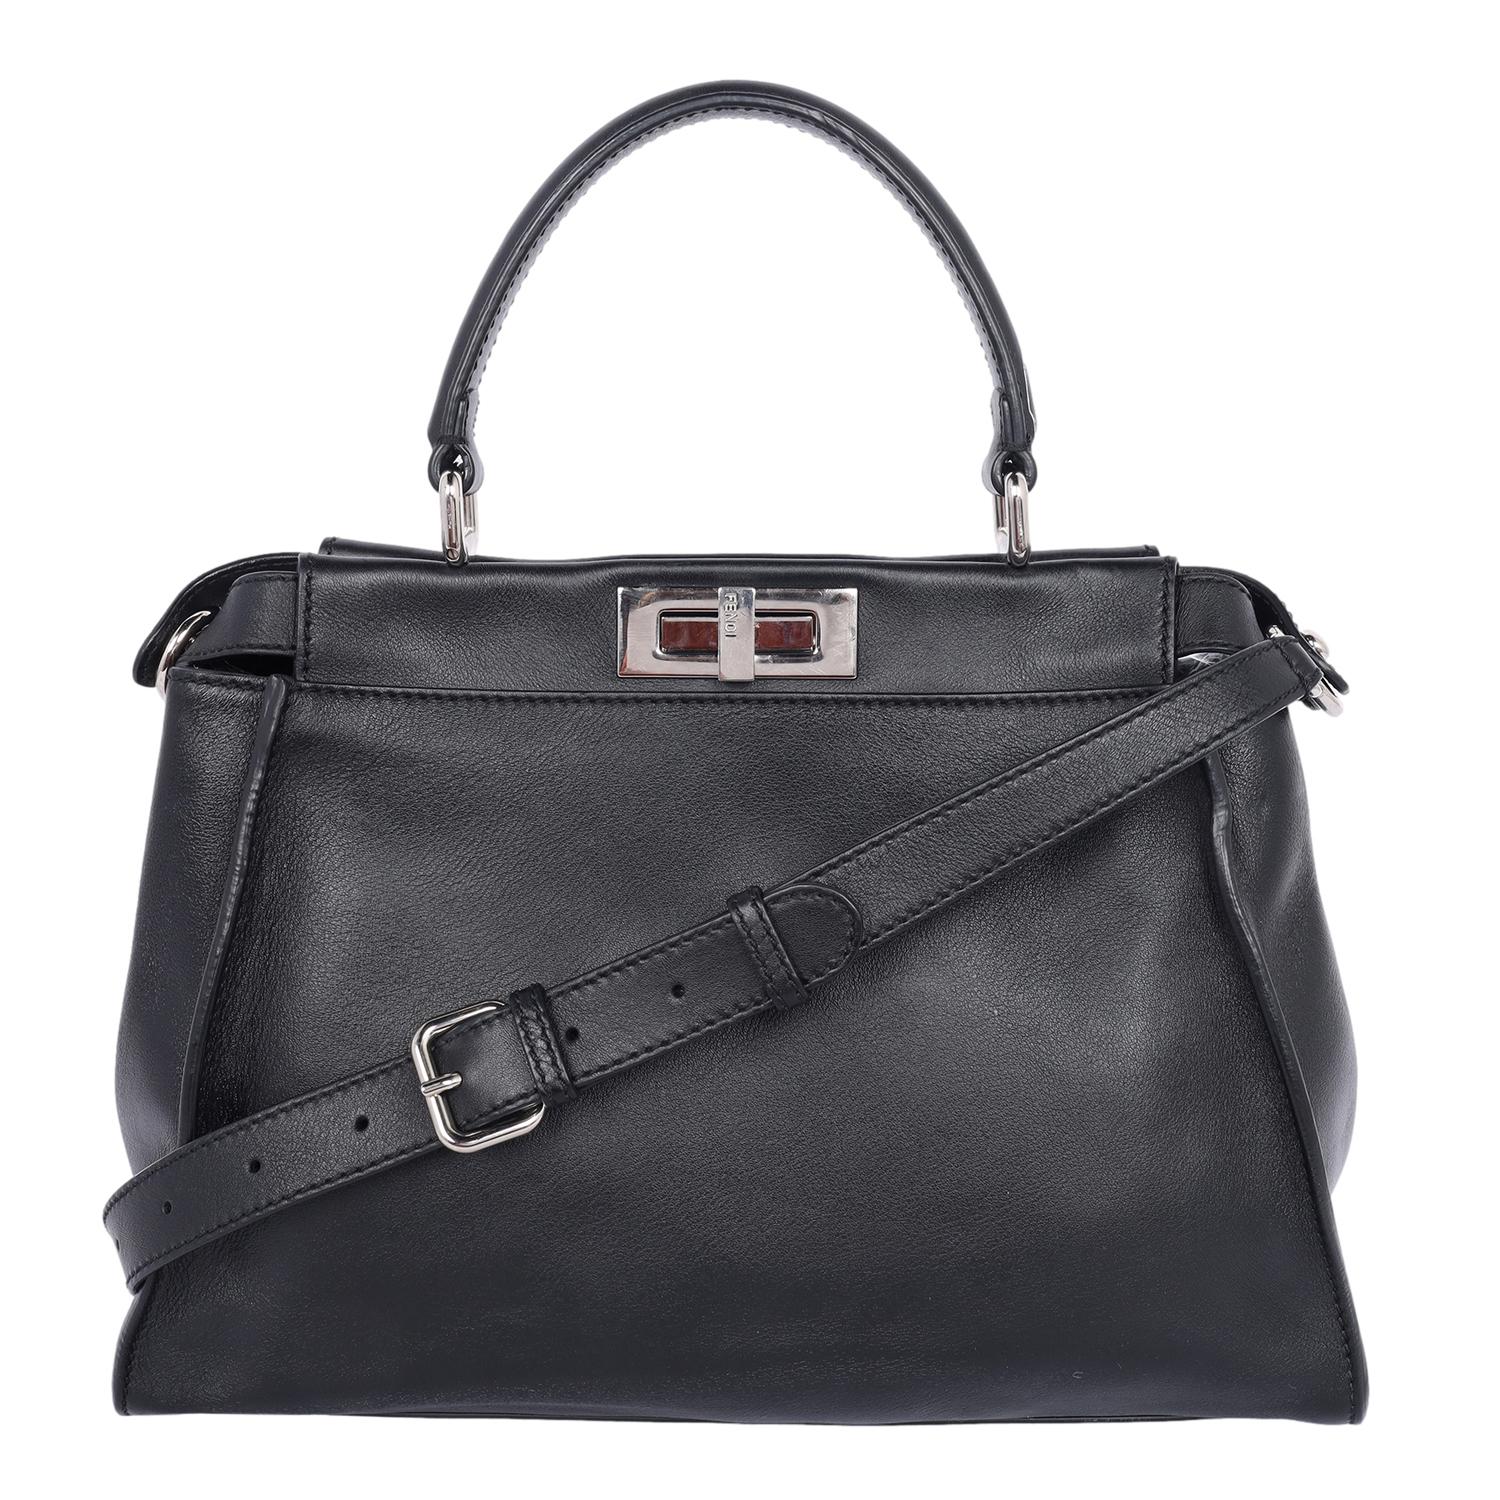 Authentic, pre-loved Fendi Vitello Seta Crocodile Monster Eyes Medium Peekaboo Iconic Satchel in black. Features soft calfskin leather in black with side belts and expandable sides, top handle, adjustable crossbody strap, silver hardware, turn lock